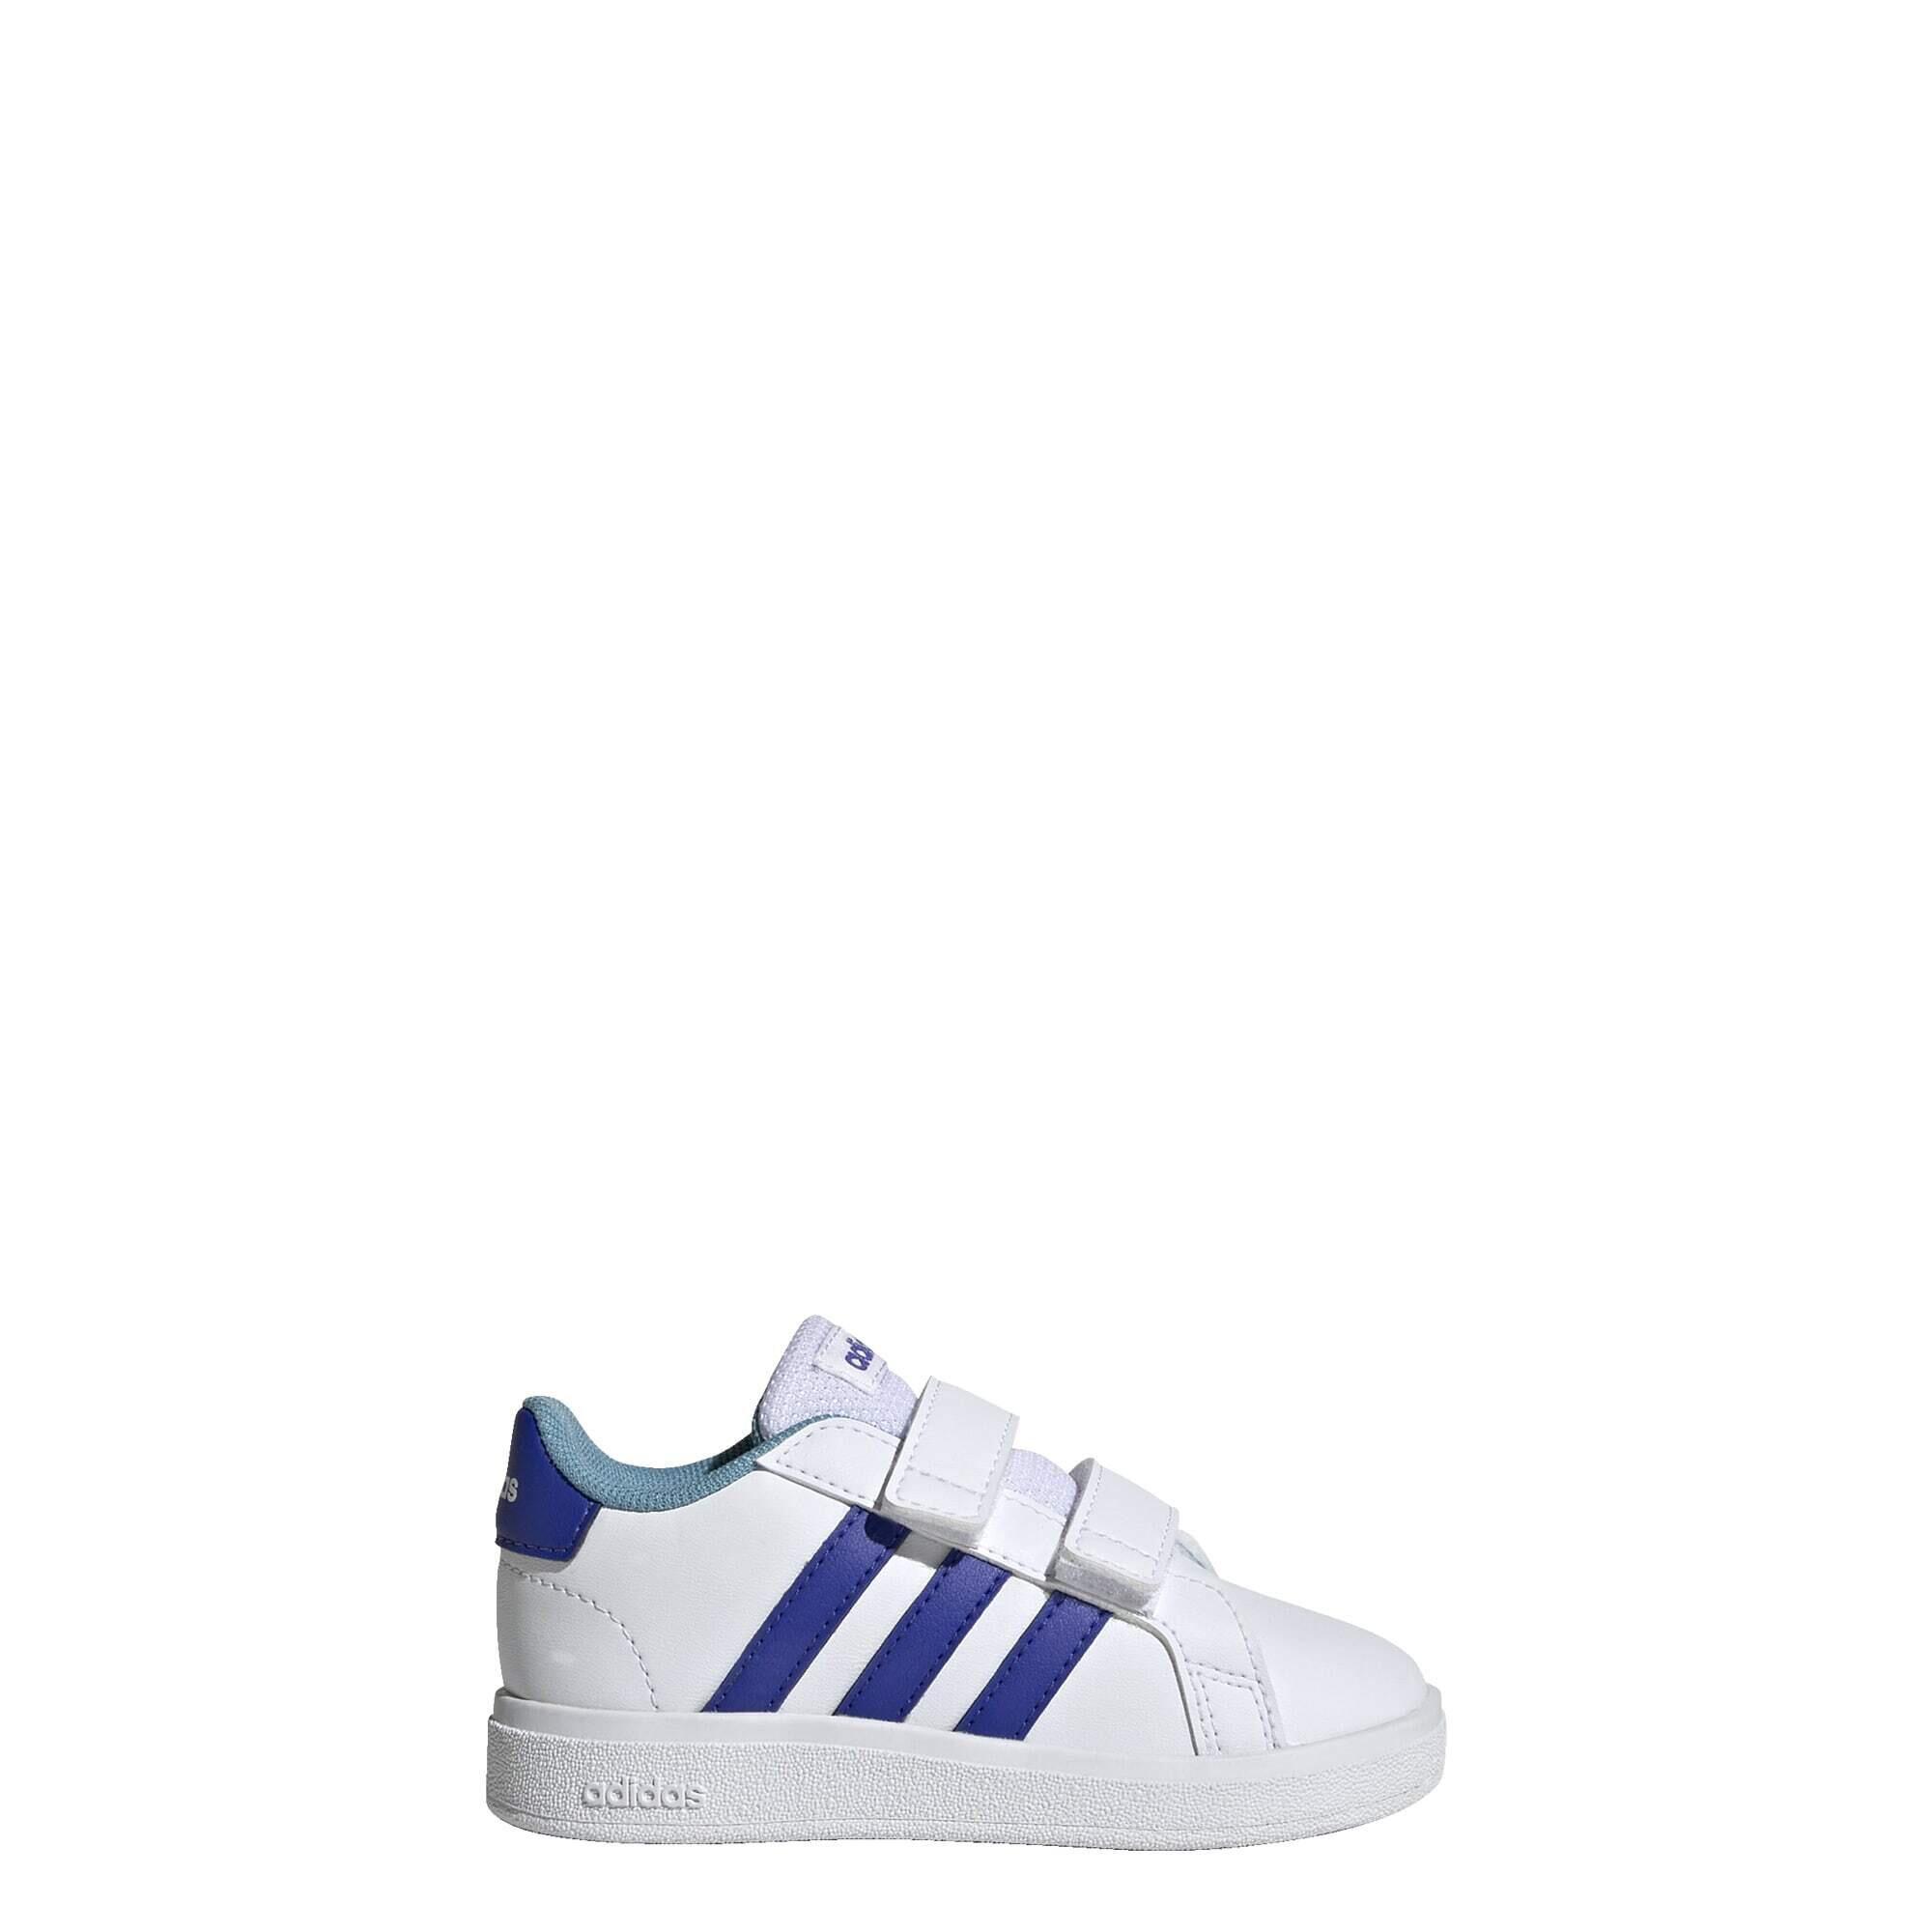 ADIDAS Grand Court Lifestyle Hook and Loop Shoes